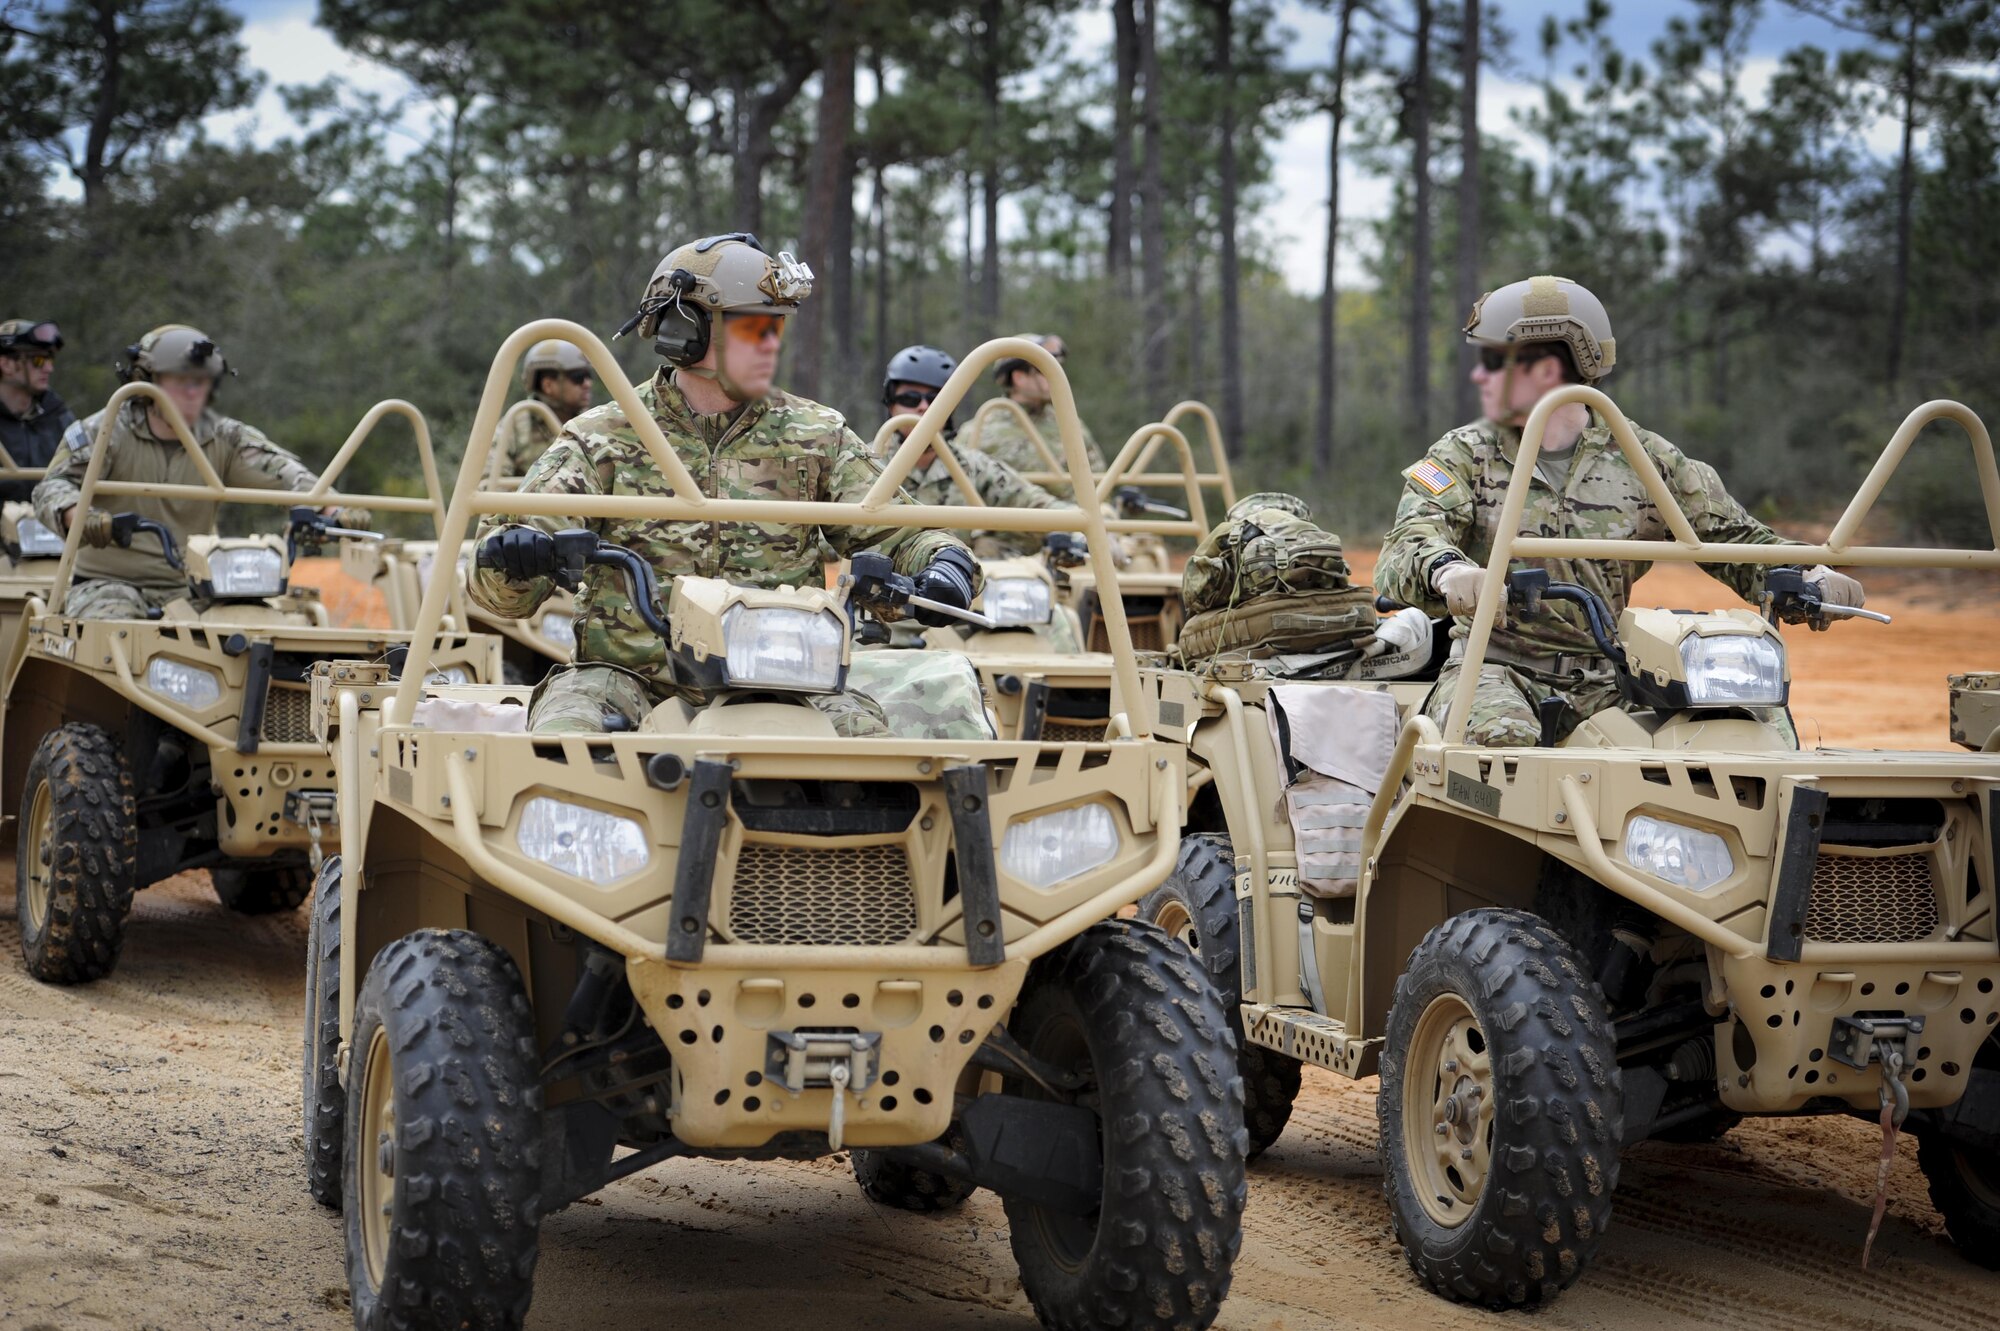 Soldiers with the 1st Battalion, 10th Special Forces Group, roll-out to begin training for all-terrain vehicle operation qualification at Buck Pond in Navarre, Fla., March 14, 2017. The 1st Special Operations Support Squadron Operational Support Joint Office facilitates special operations forces training to ensure global readiness. (U.S. Air Force photo by Airman 1st Class Dennis Spain)